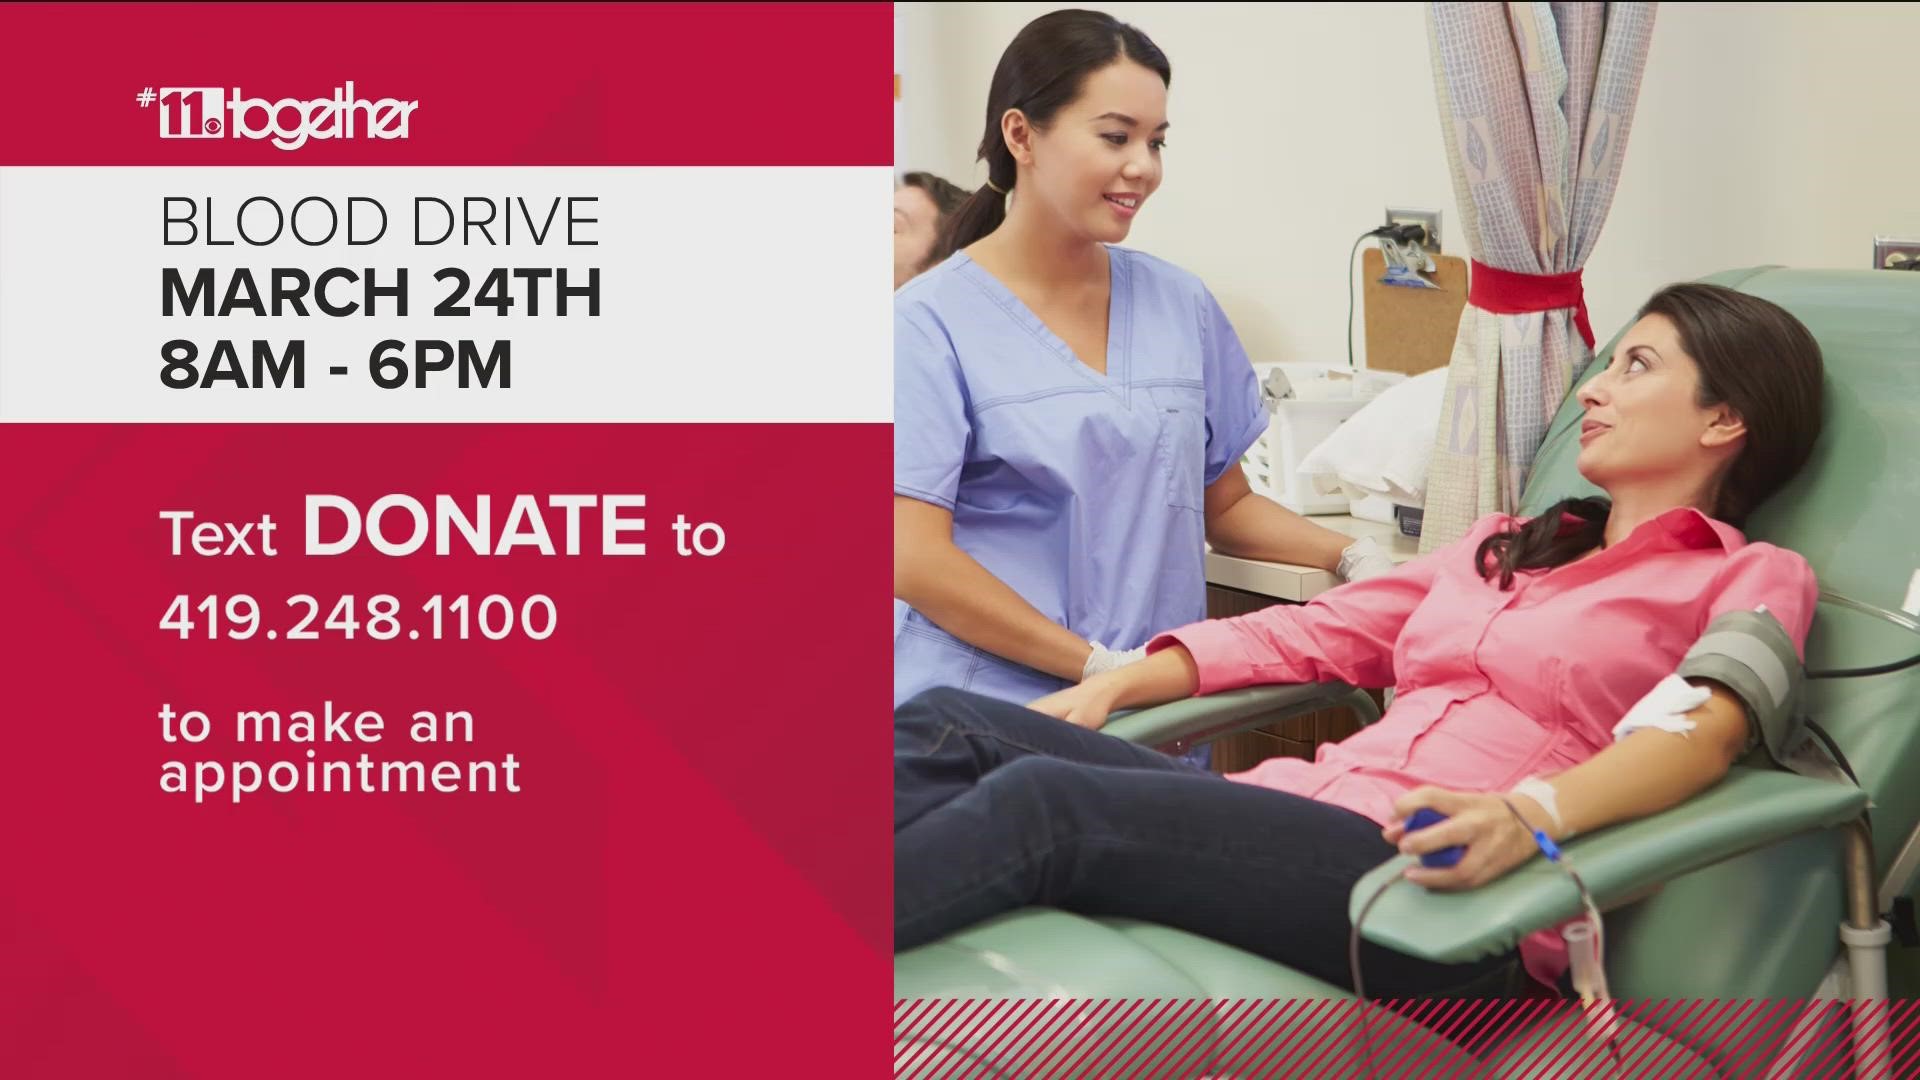 The annual blood drive will be from 8 a.m. to 6 p.m. Friday, March 24, at Maumee United Methodist Church.